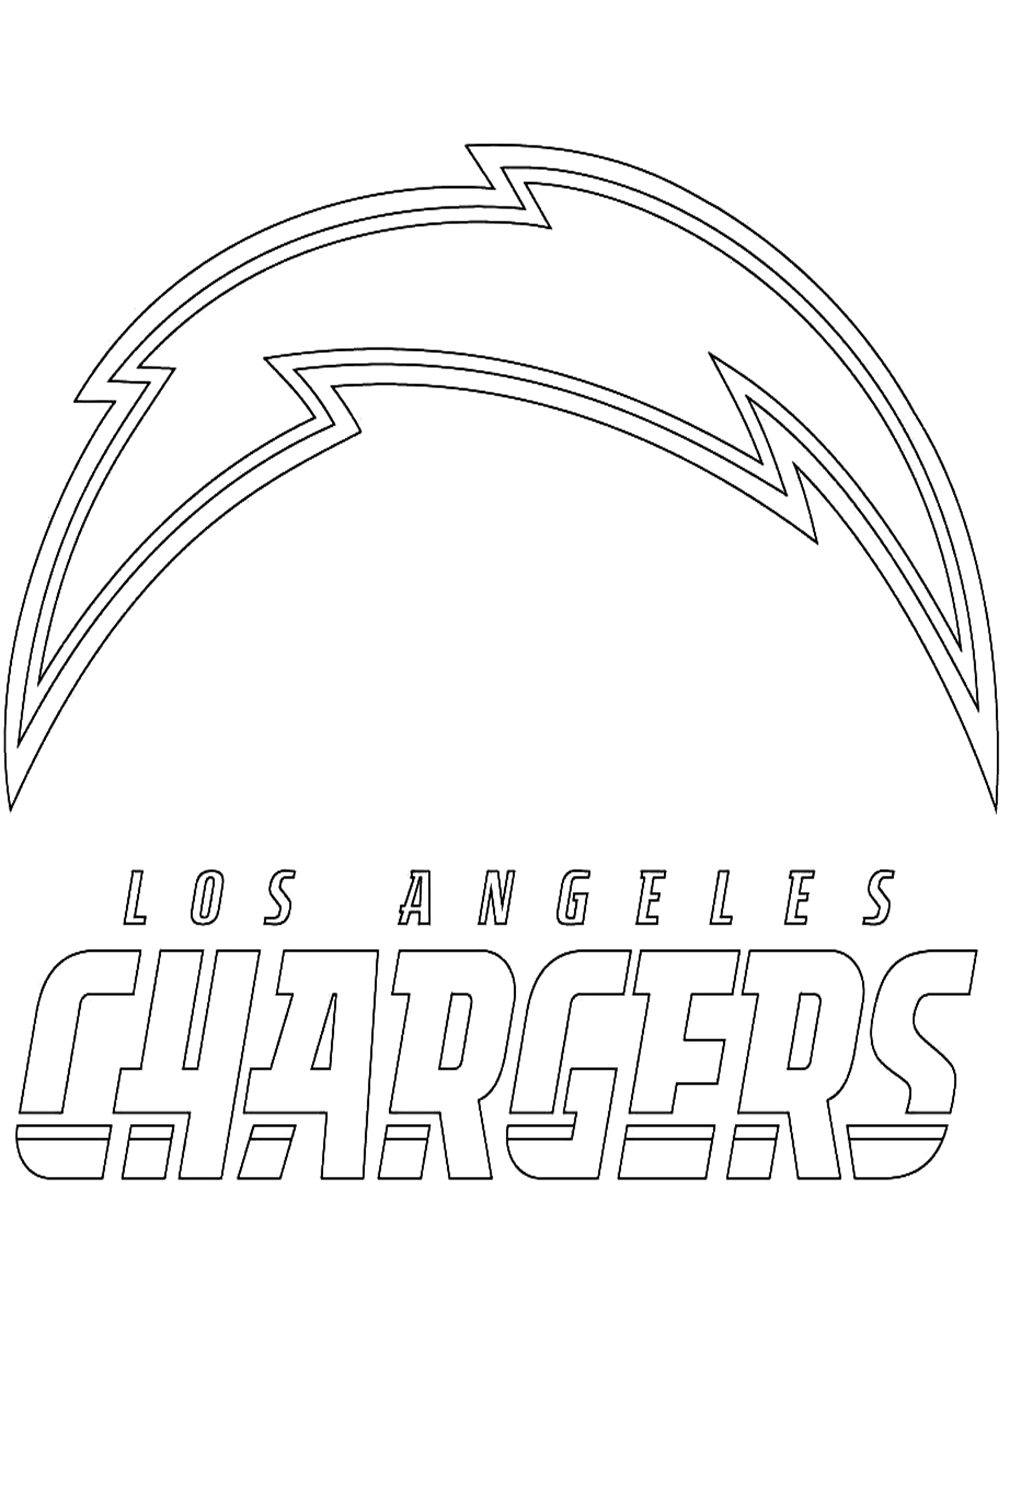 Los Angeles Chargers Logo Coloring Page